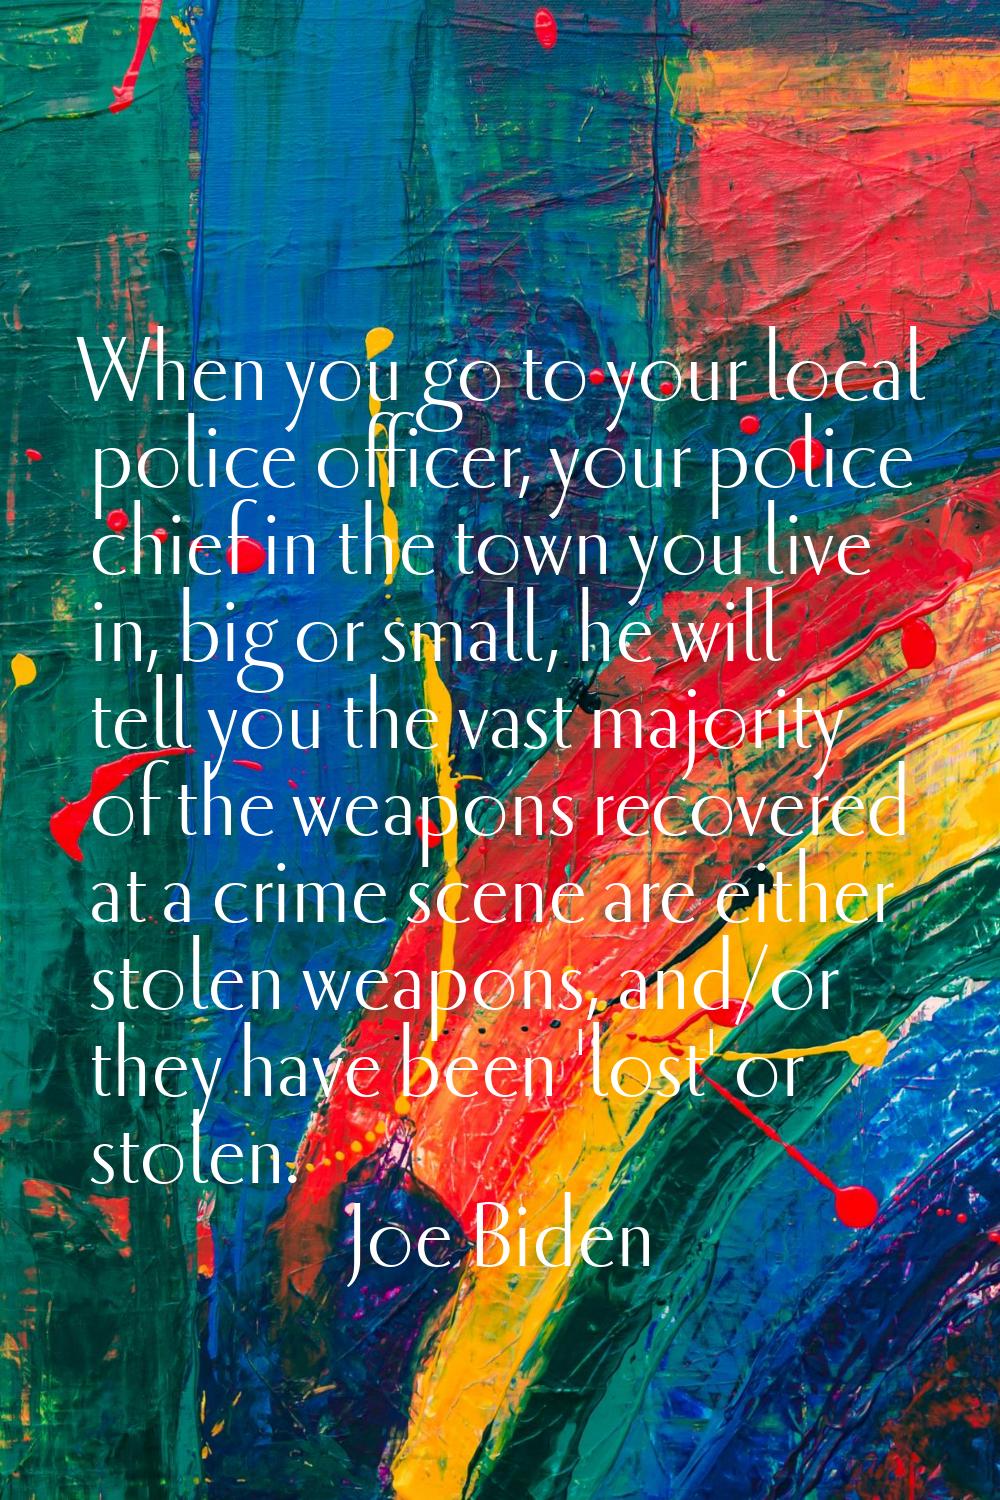 When you go to your local police officer, your police chief in the town you live in, big or small, 